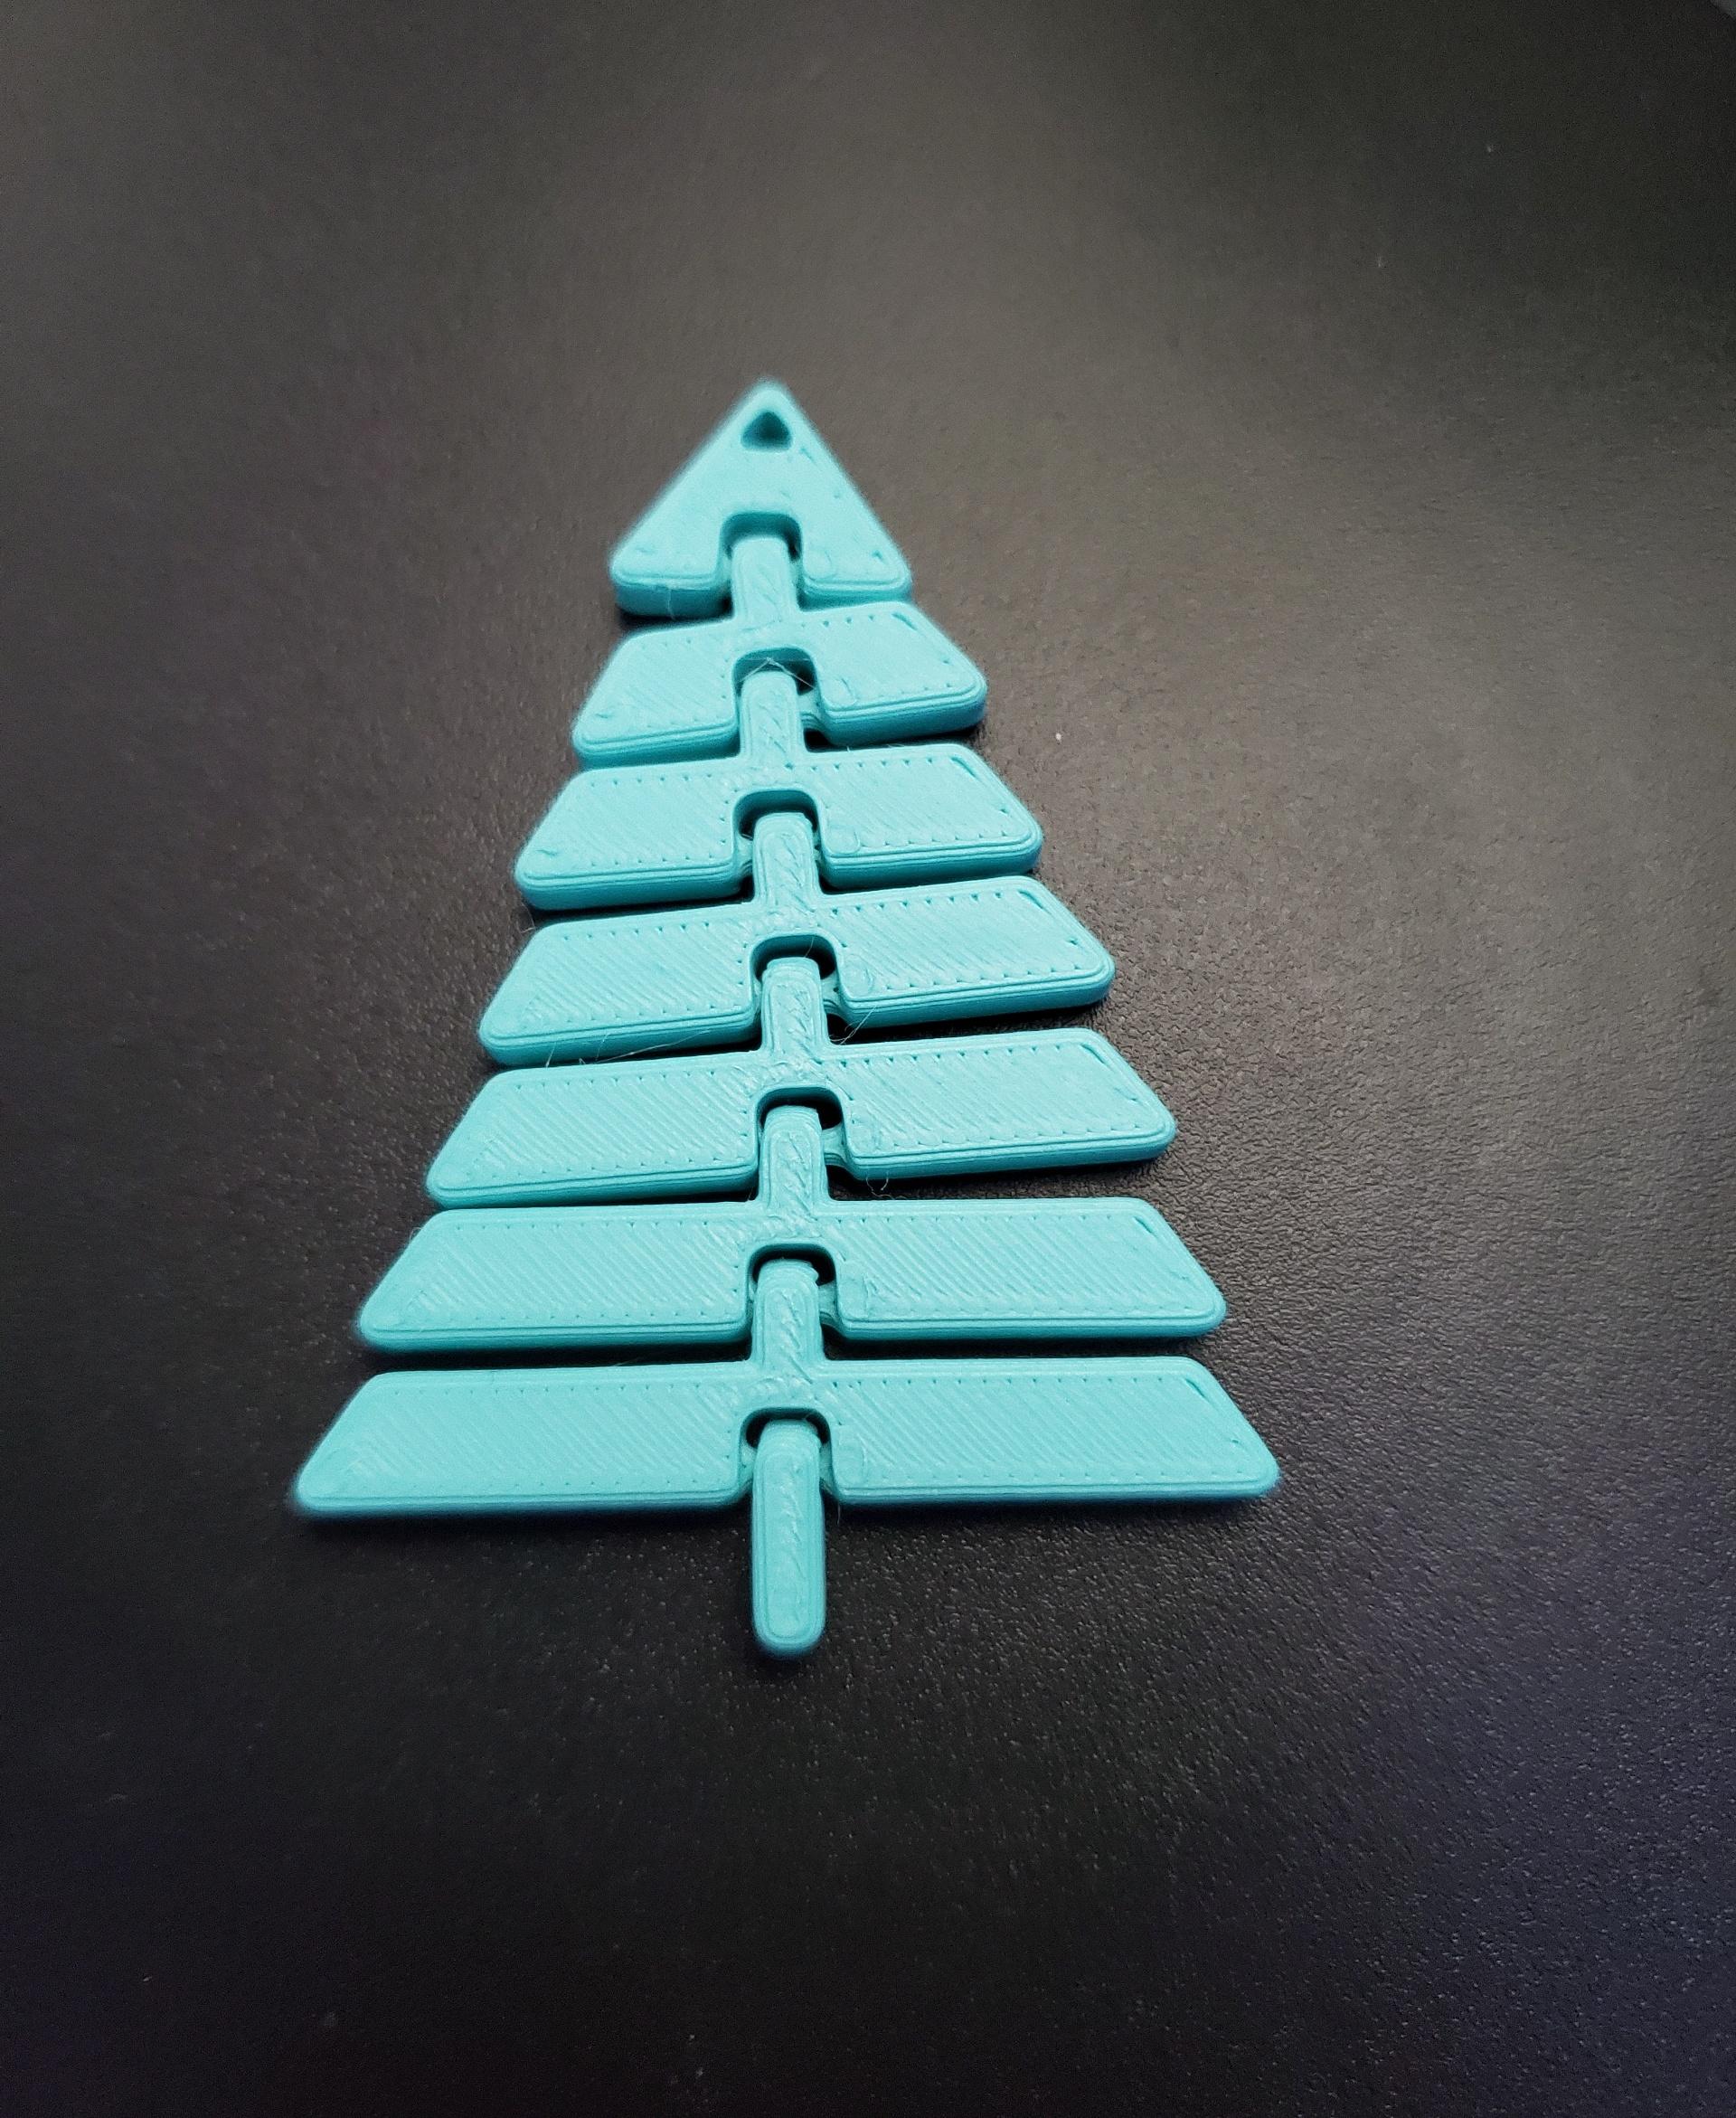 Articulated Christmas Tree Keychain - Print in place fidget toy - polyterra arctic teal - 3d model